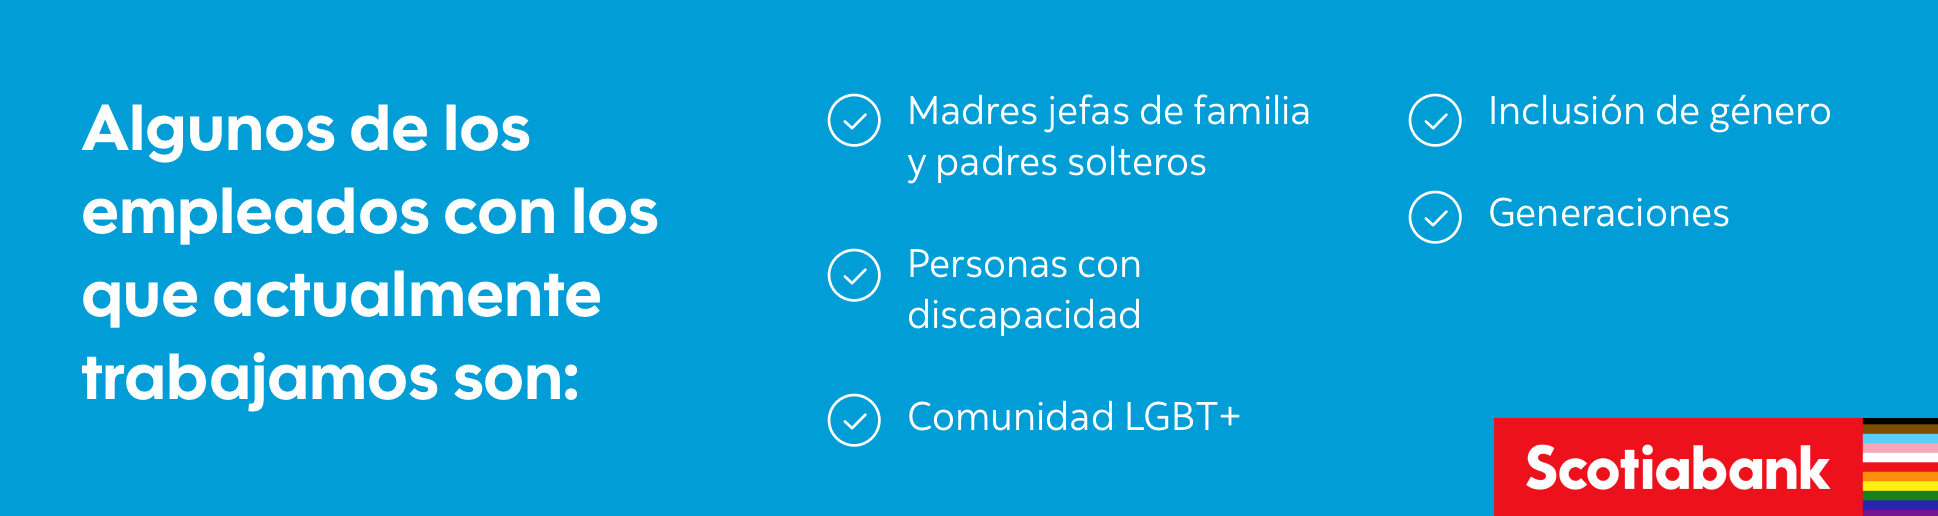 inclusion lgbt scotiabank mexico